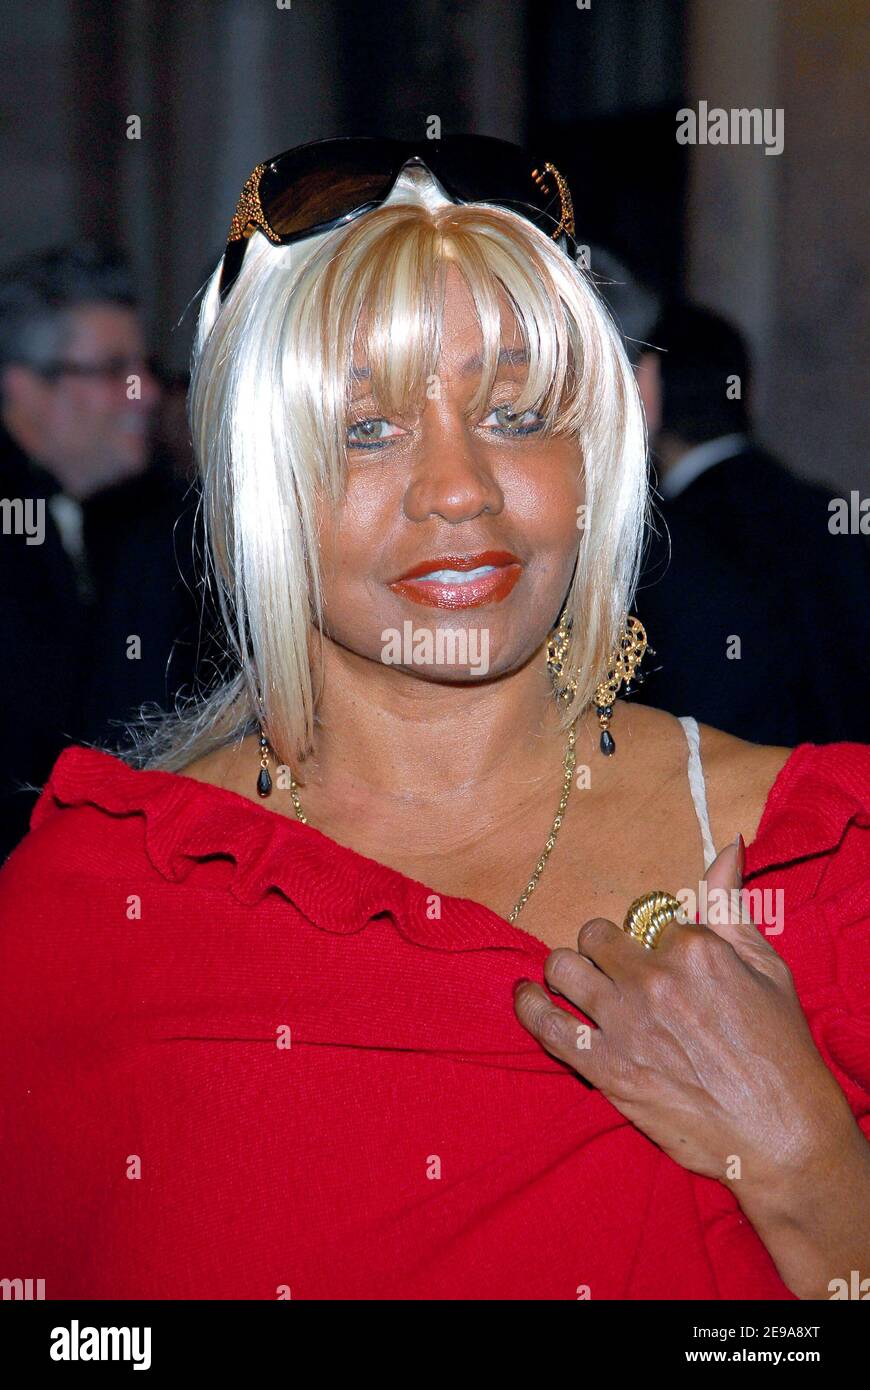 Janice Combs, P.Diddy's mother, attends the Dennis Basso Fall/Winter 2006 Fashion Show held at the New York Public Library in New York, NY, USA, on May 15, 2006. Photo by Gregorio Binuya/ABACAPRESS.COM Stock Photo